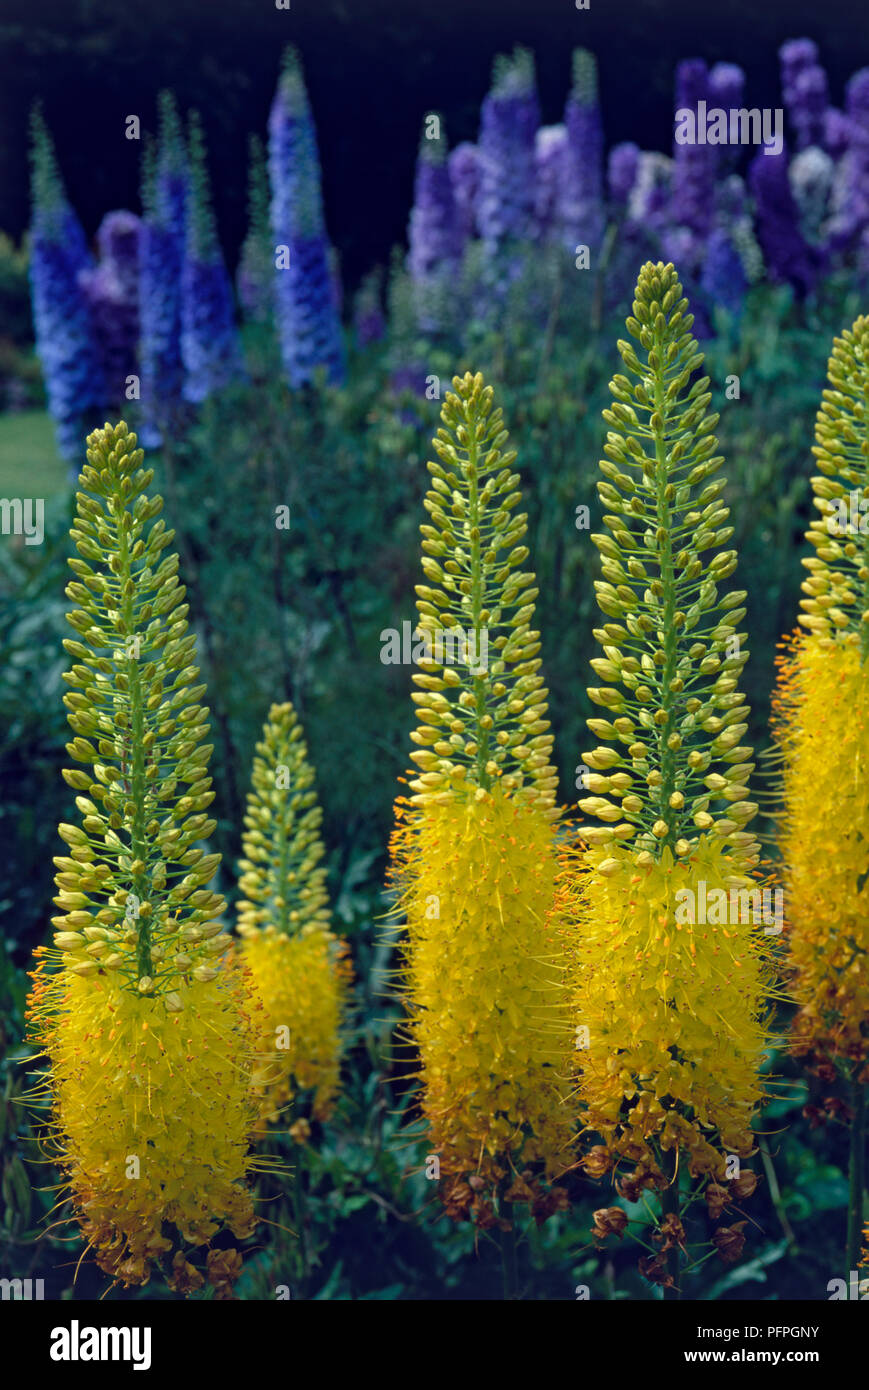 Eremurus stenophyllus (Foxtail lily, Desert candle), yellow flowers, close-up Stock Photo